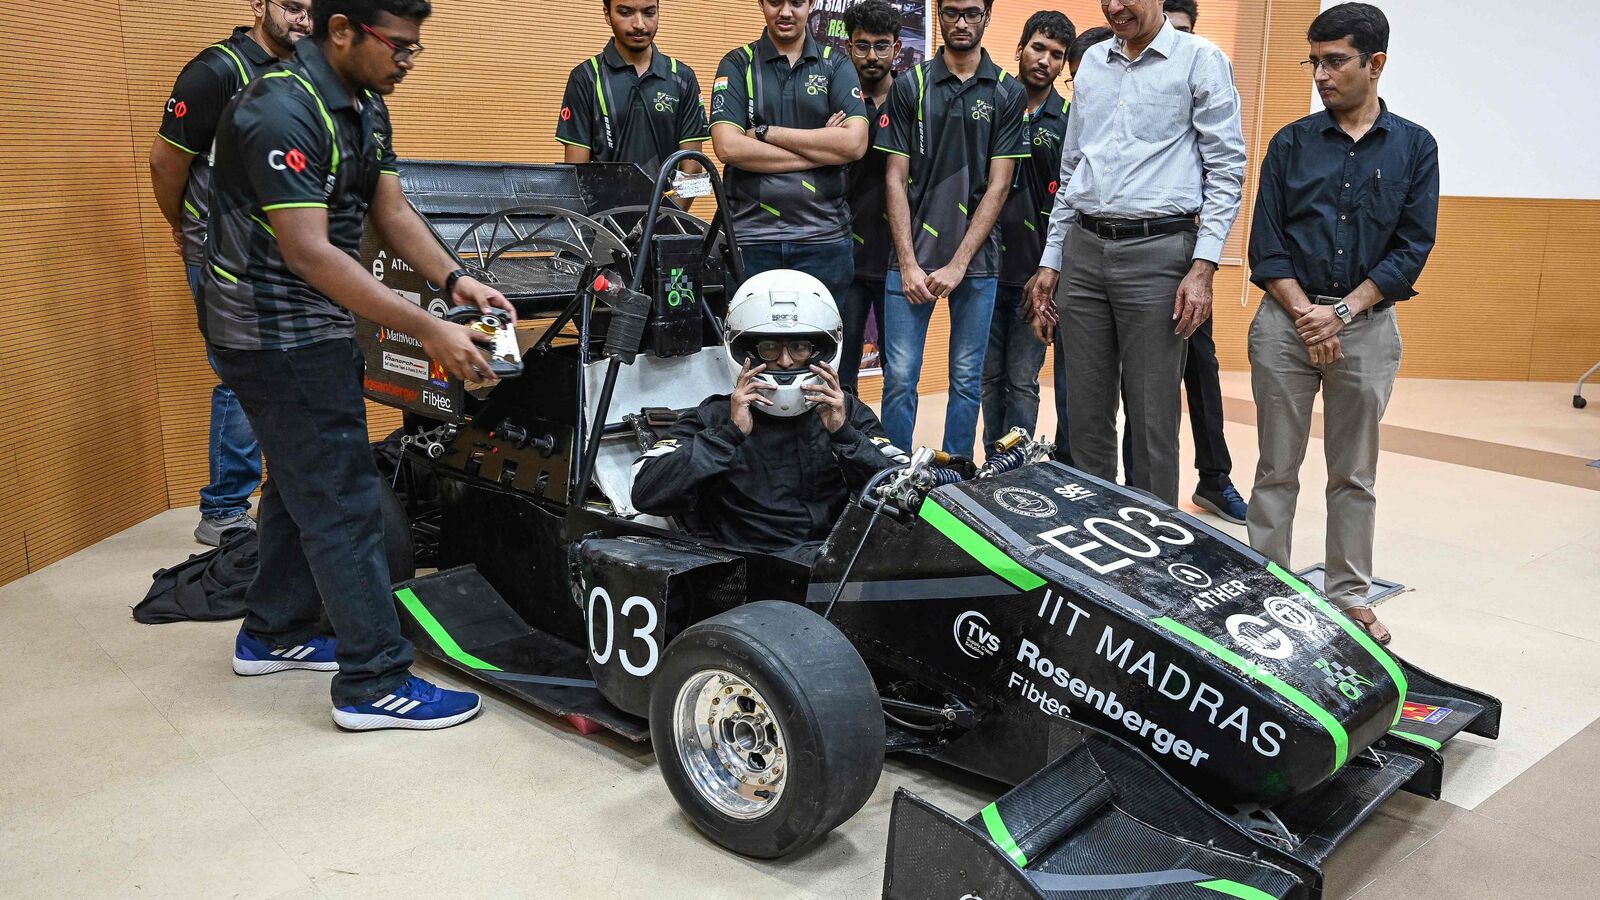 IIT Madras to start new Master's degree in electric vehicles